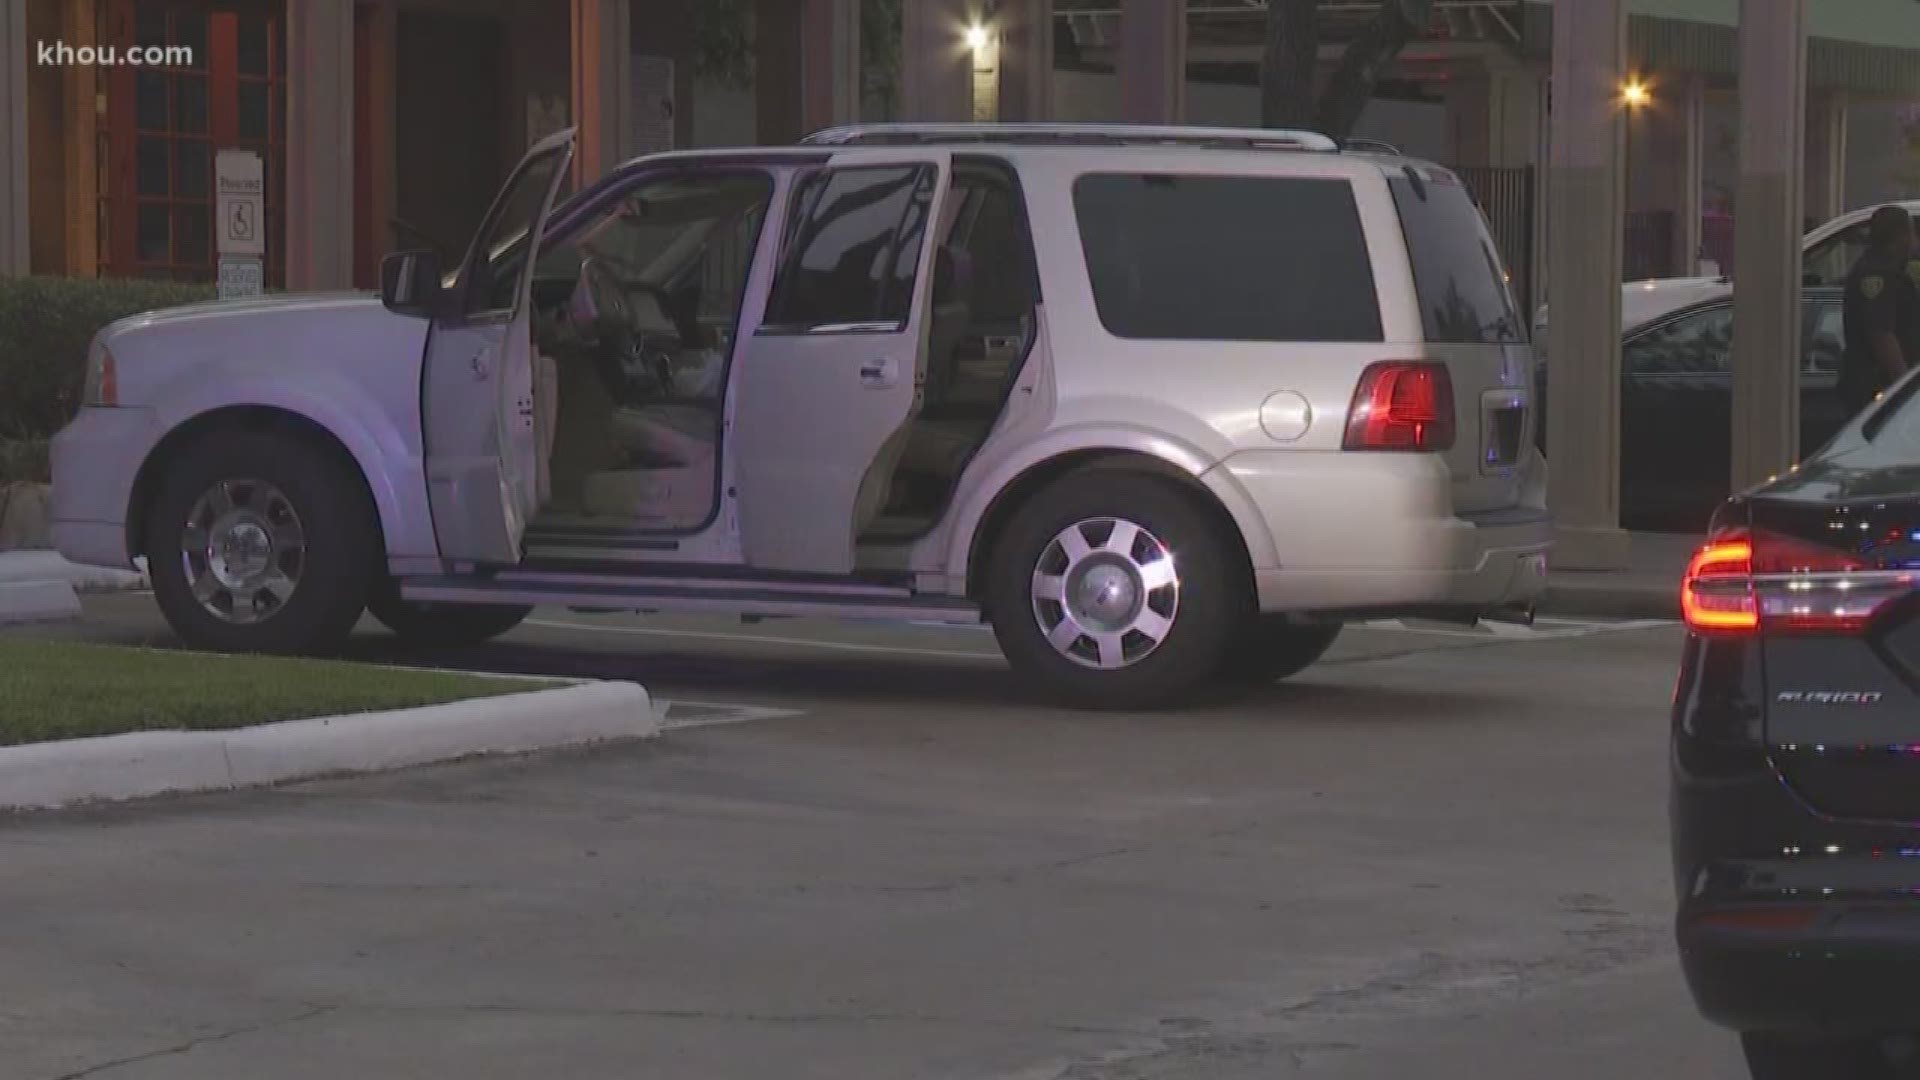 Police said a mother accidentally struck and killed her 3-year-old child when she was backing out of a parking spot at an apartment complex in west Houston.